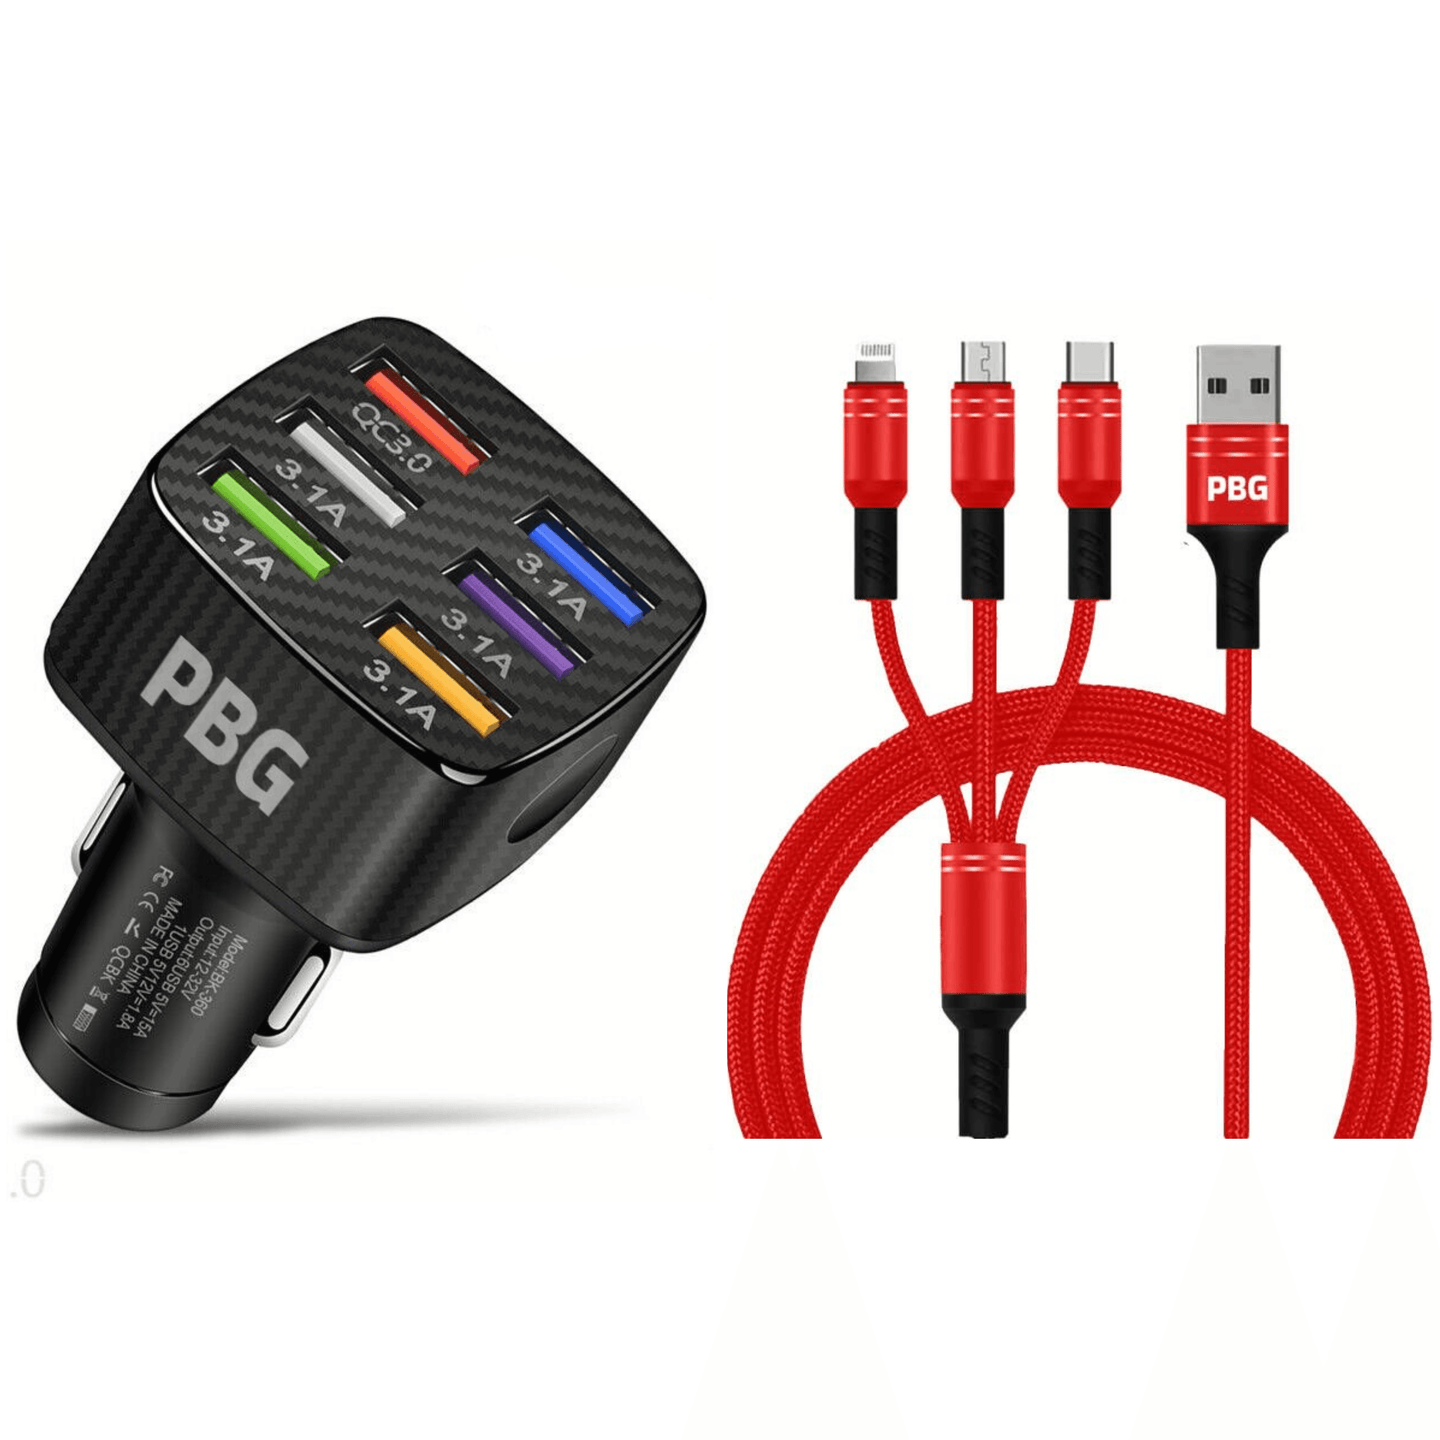 PBG LED 6 Port Car Charger and 4FT- 3 In 1 Cable Combo! - PremiumBrandGoods